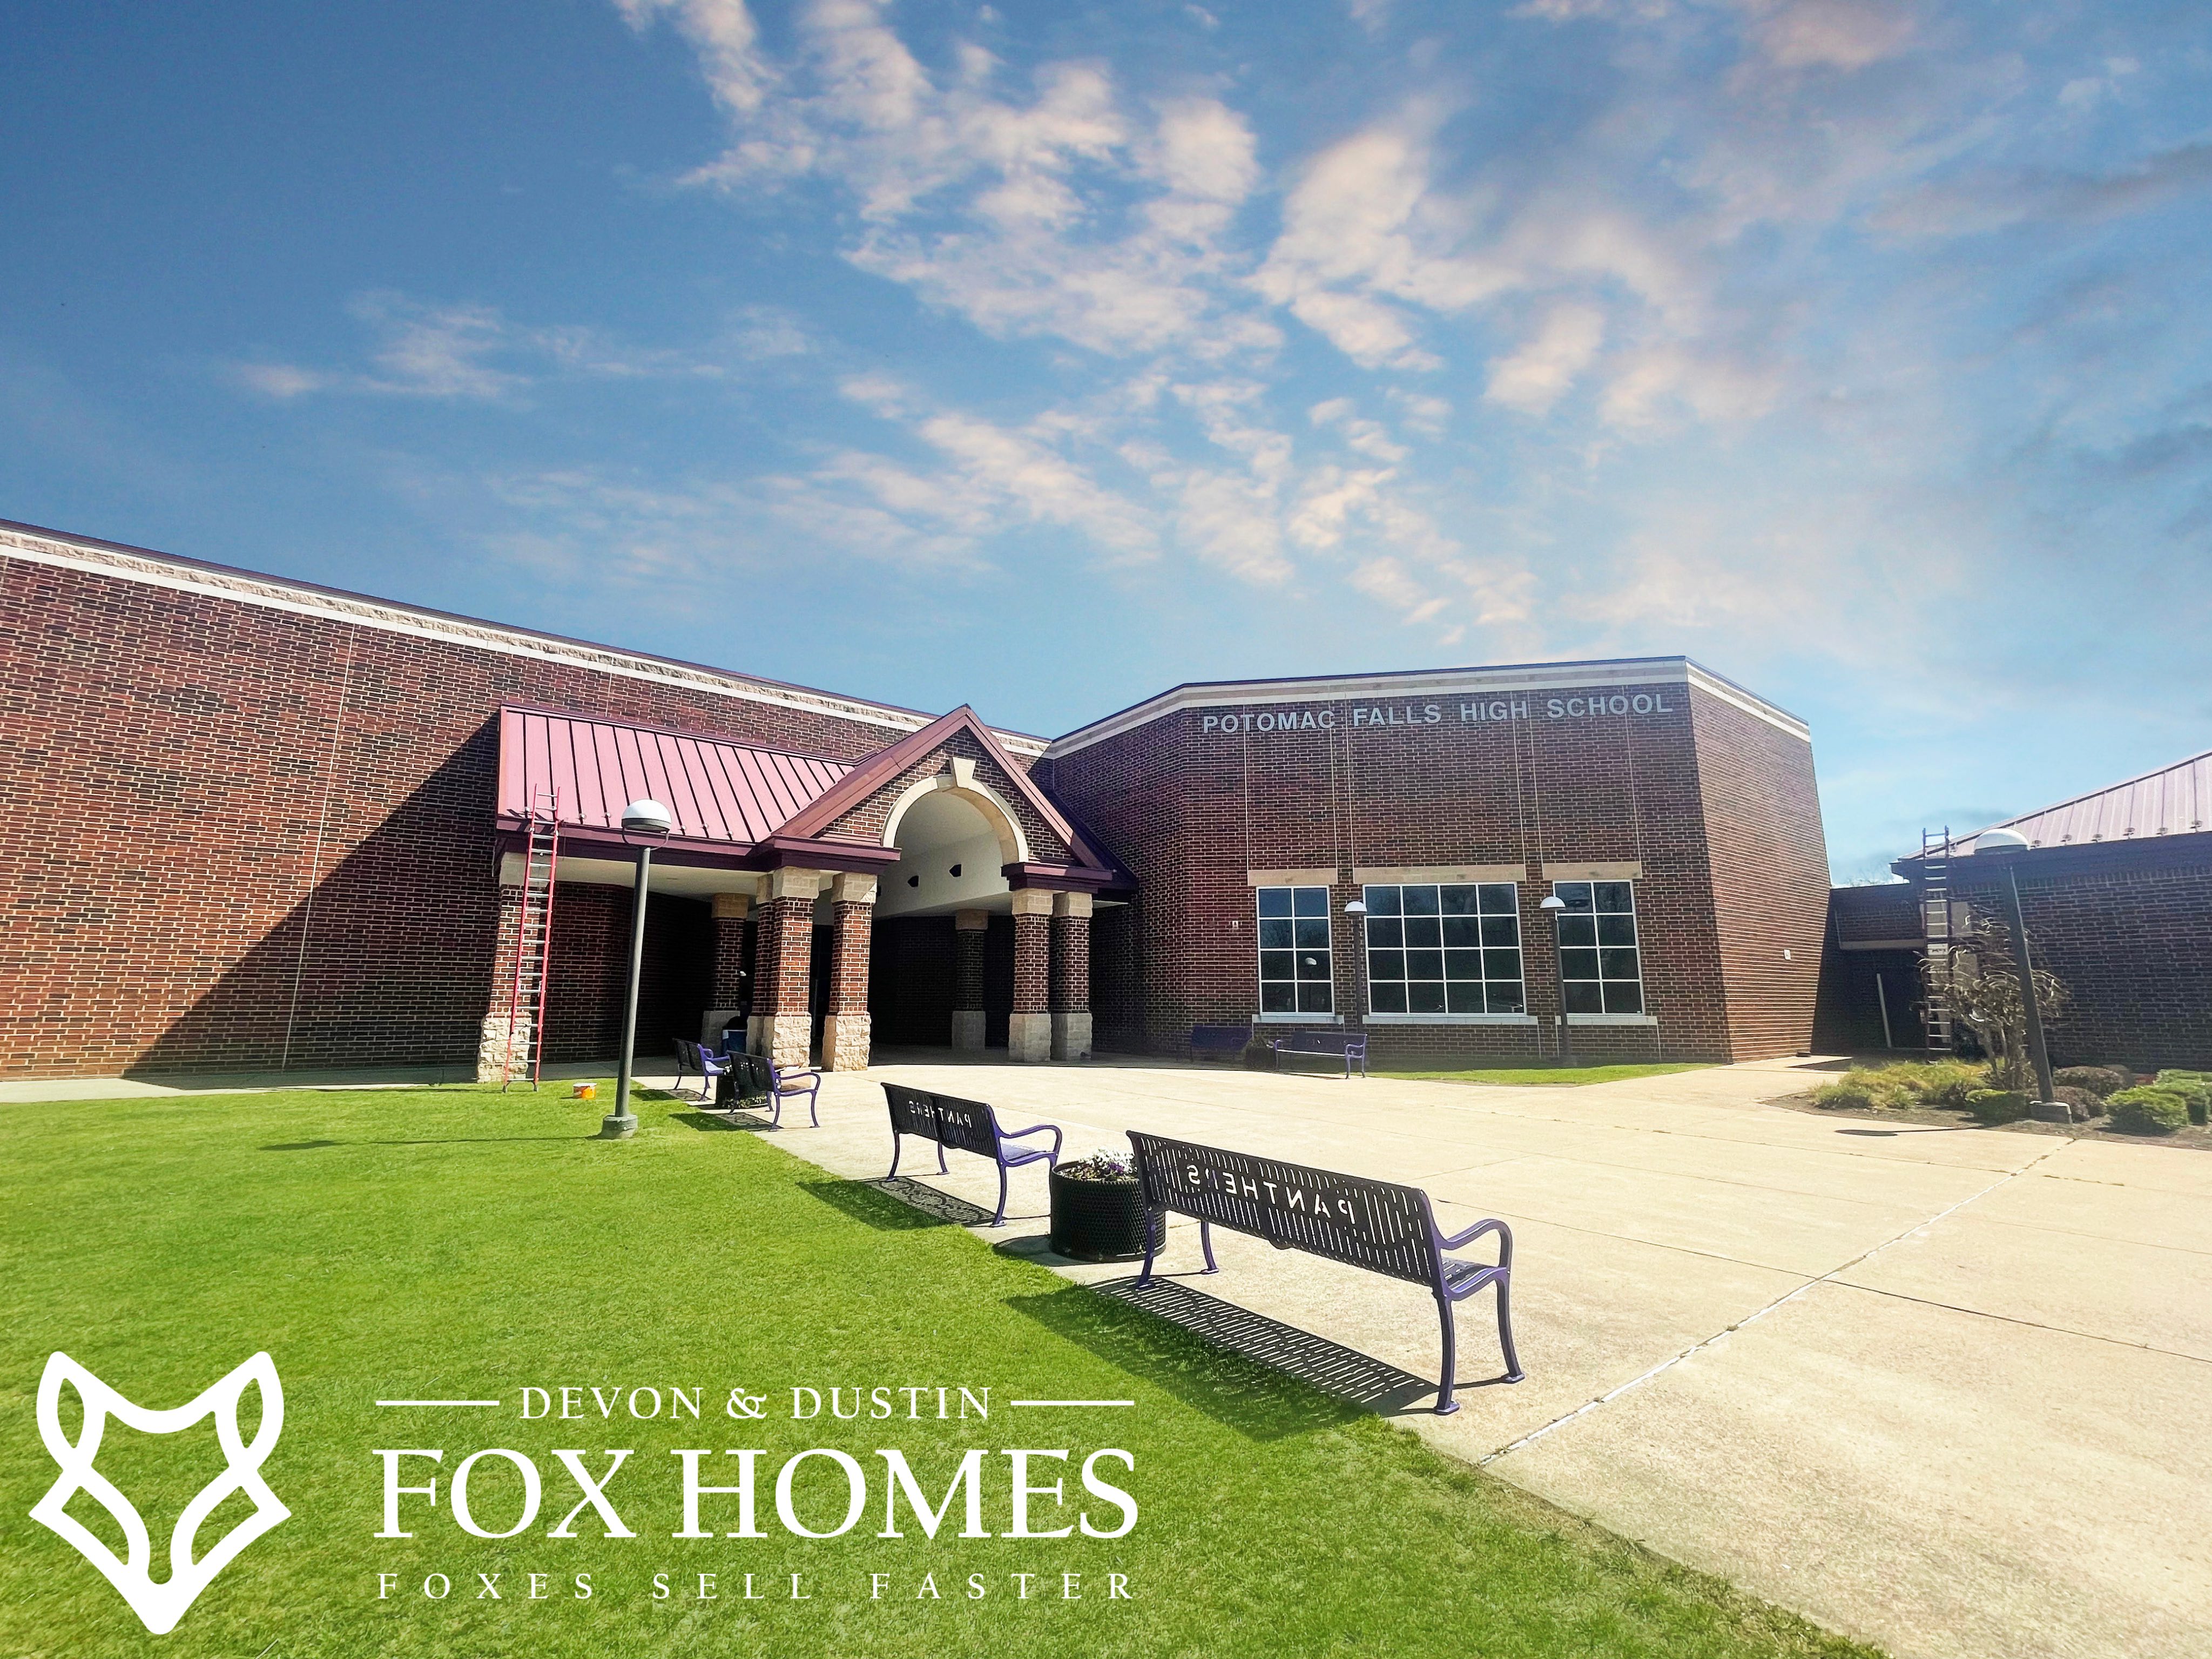 Homes-For-Sale-In-Potomac-Fall-High-School-District-Devon-and-Dustin-Fox-Fox-Homes-Team-Front-Entrance